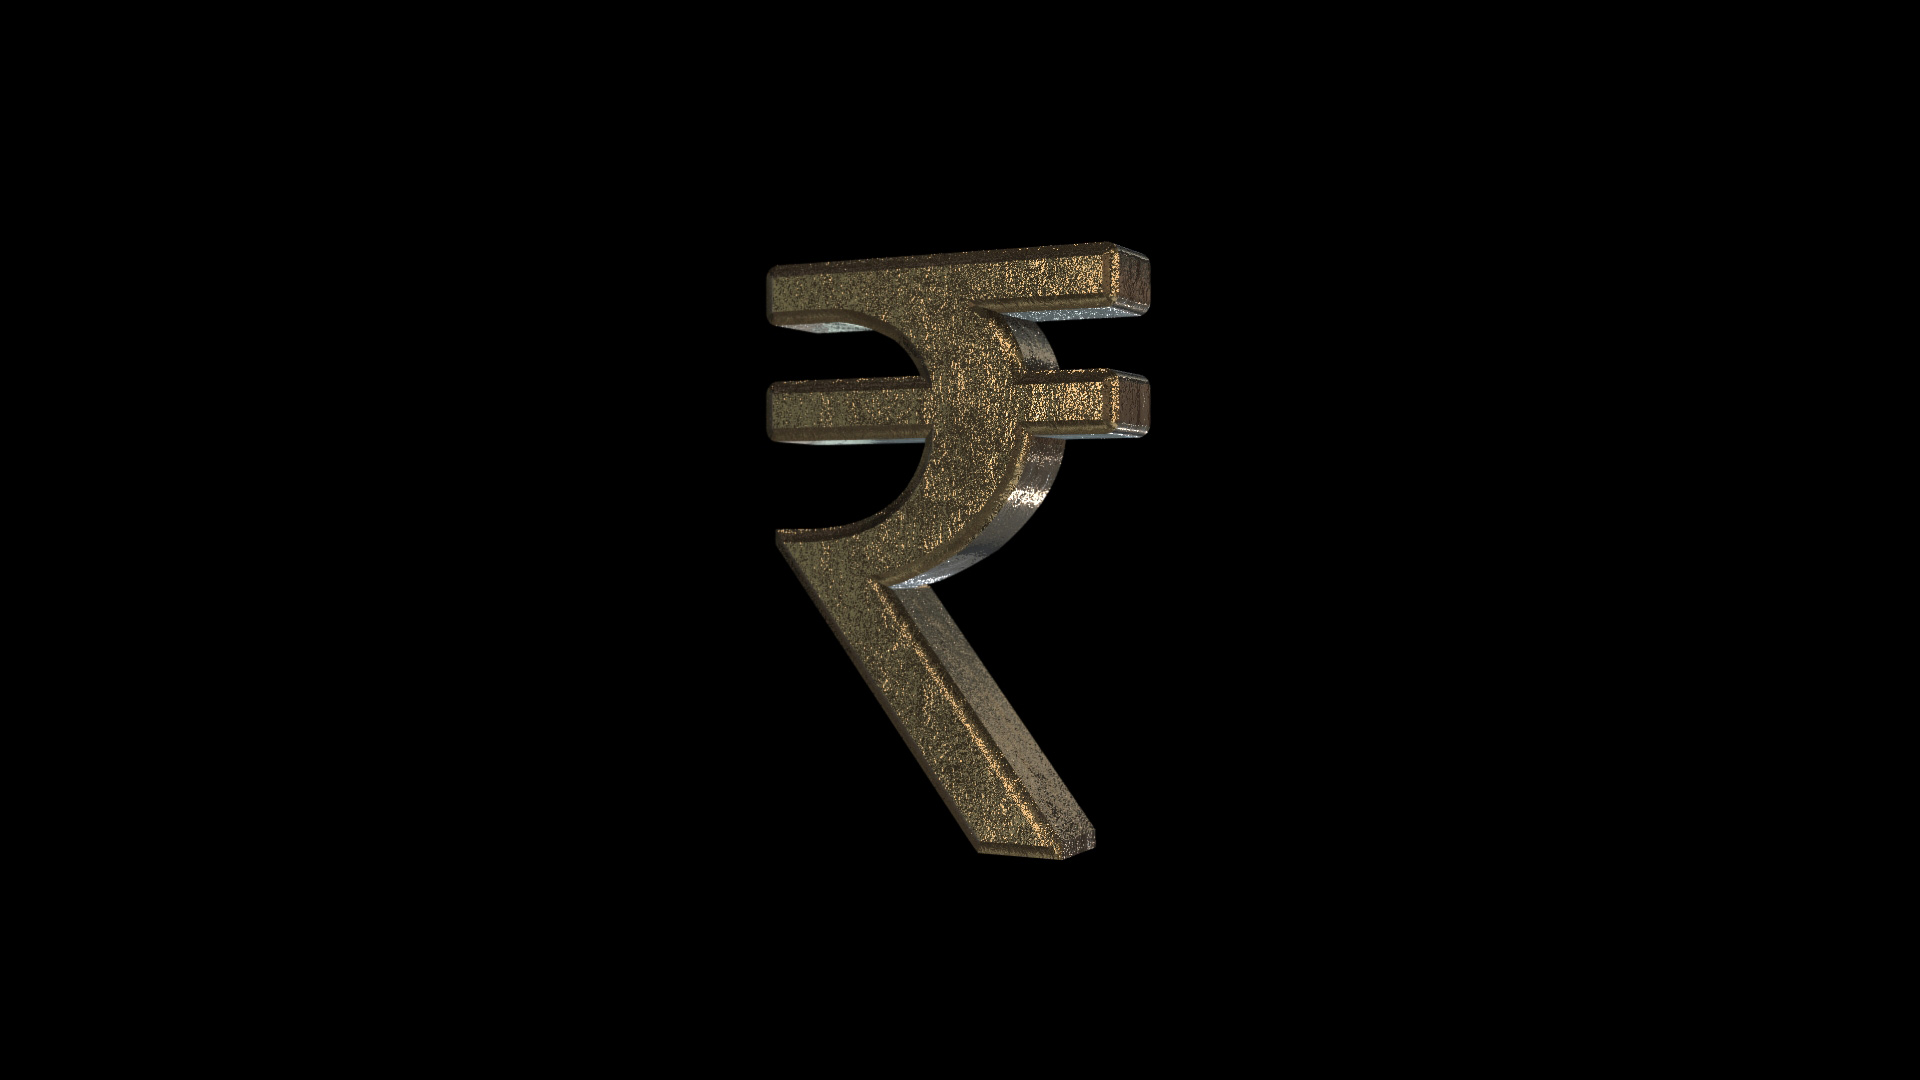 3D Raa Indian currency symbol